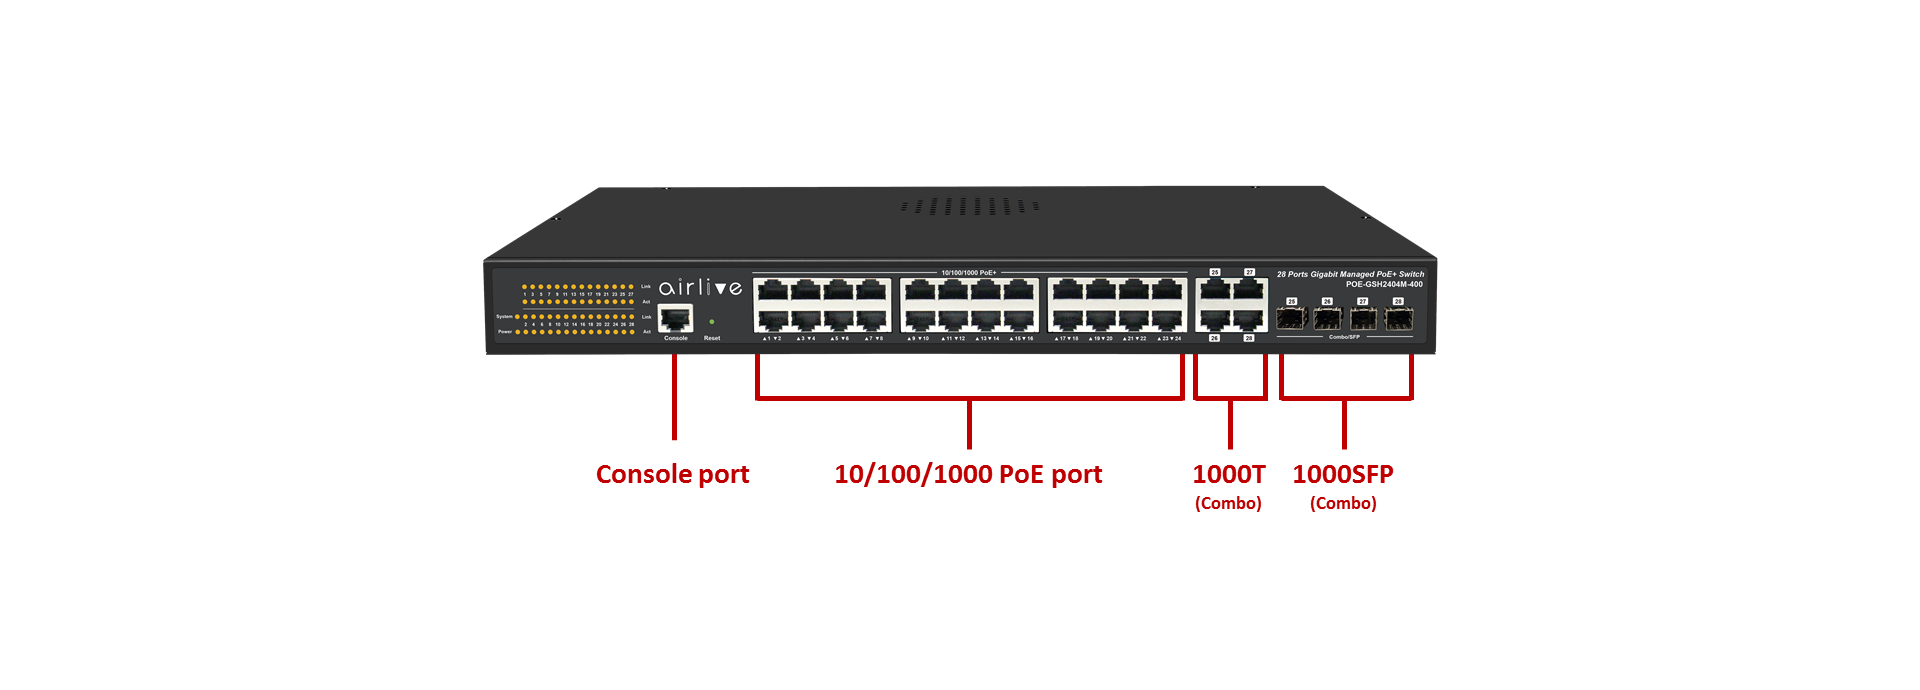 SNMP & PoE managed Switch with Advanced VLAN Policy for Video Conferring | Surveillance | Voice | Data